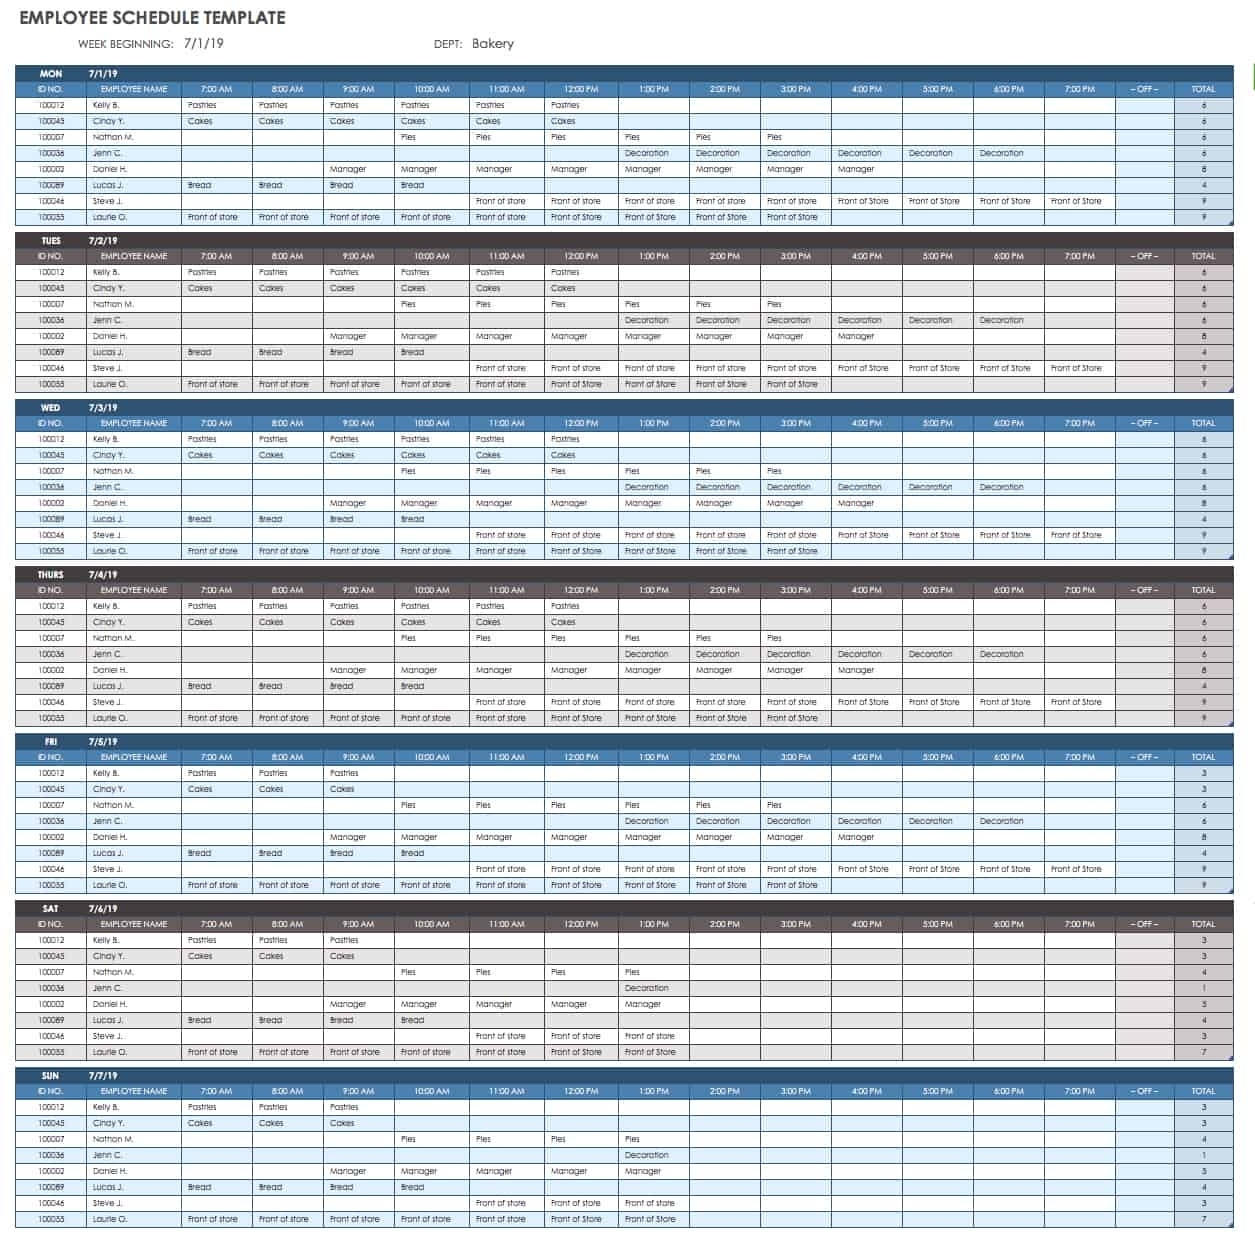 Free Work Schedule Templates For Word And Excel |Smartsheet 4 Person Calendar Template